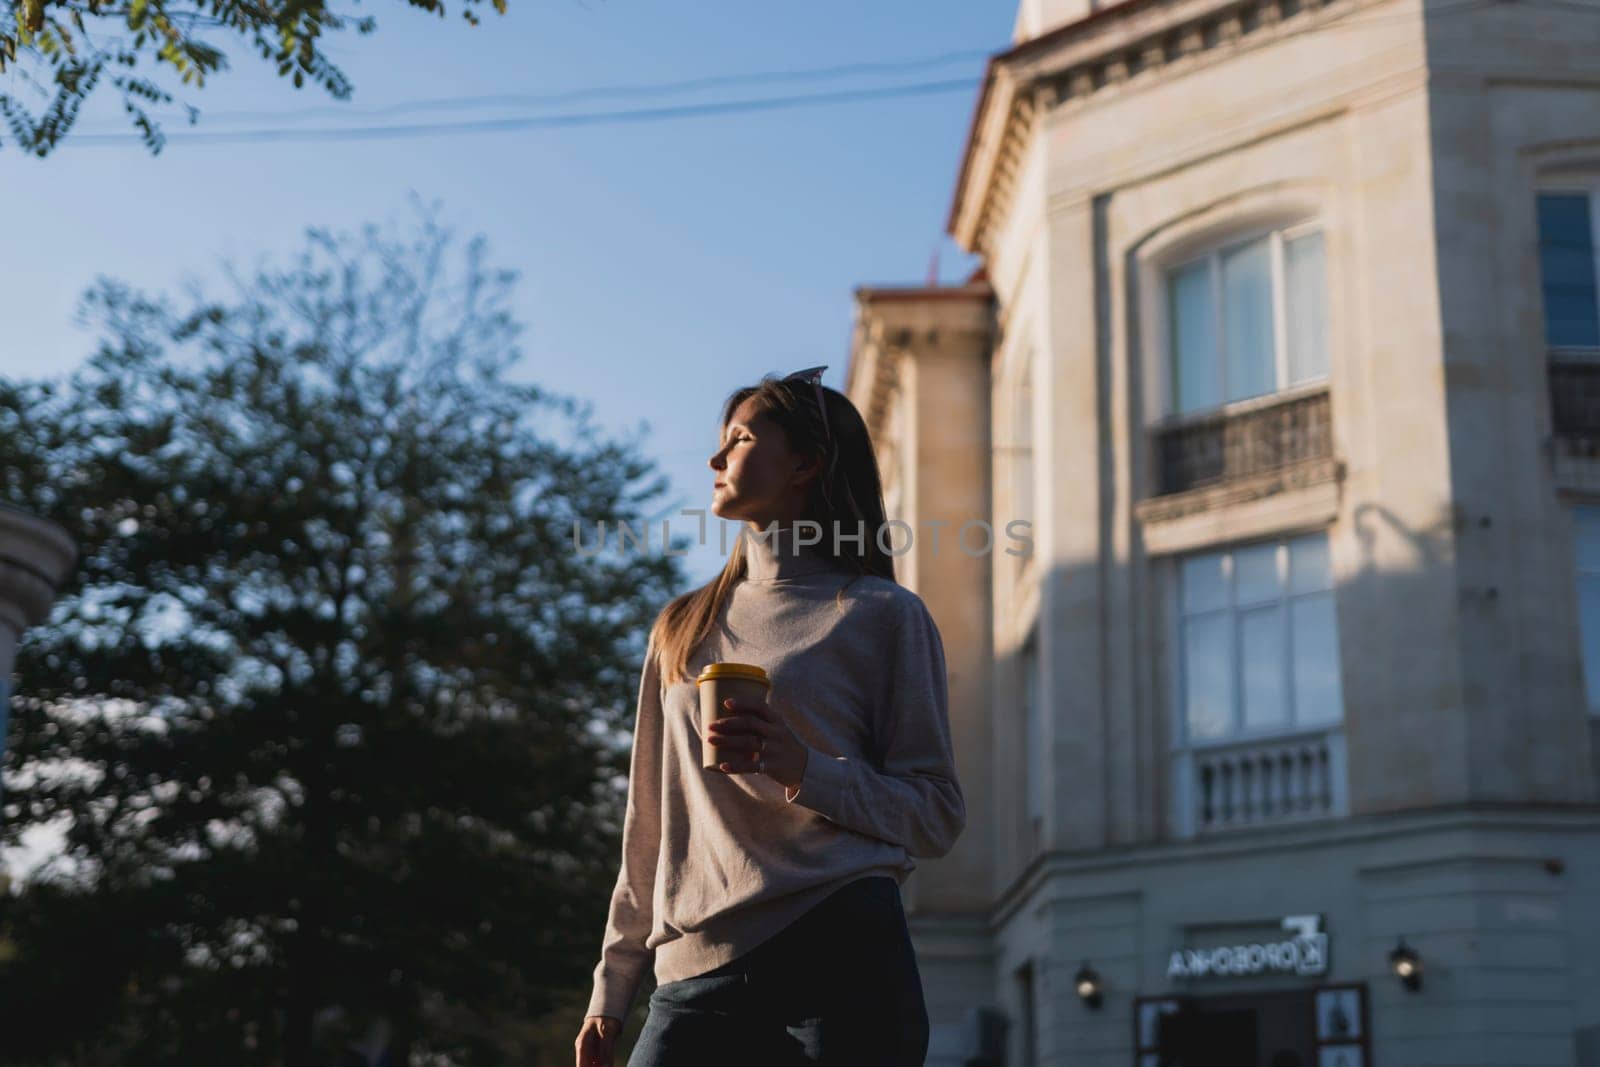 A woman is walking down the street holding a cup of coffee. The image has a calm and peaceful mood, as the woman is walking alone and enjoying her coffee. by Matiunina